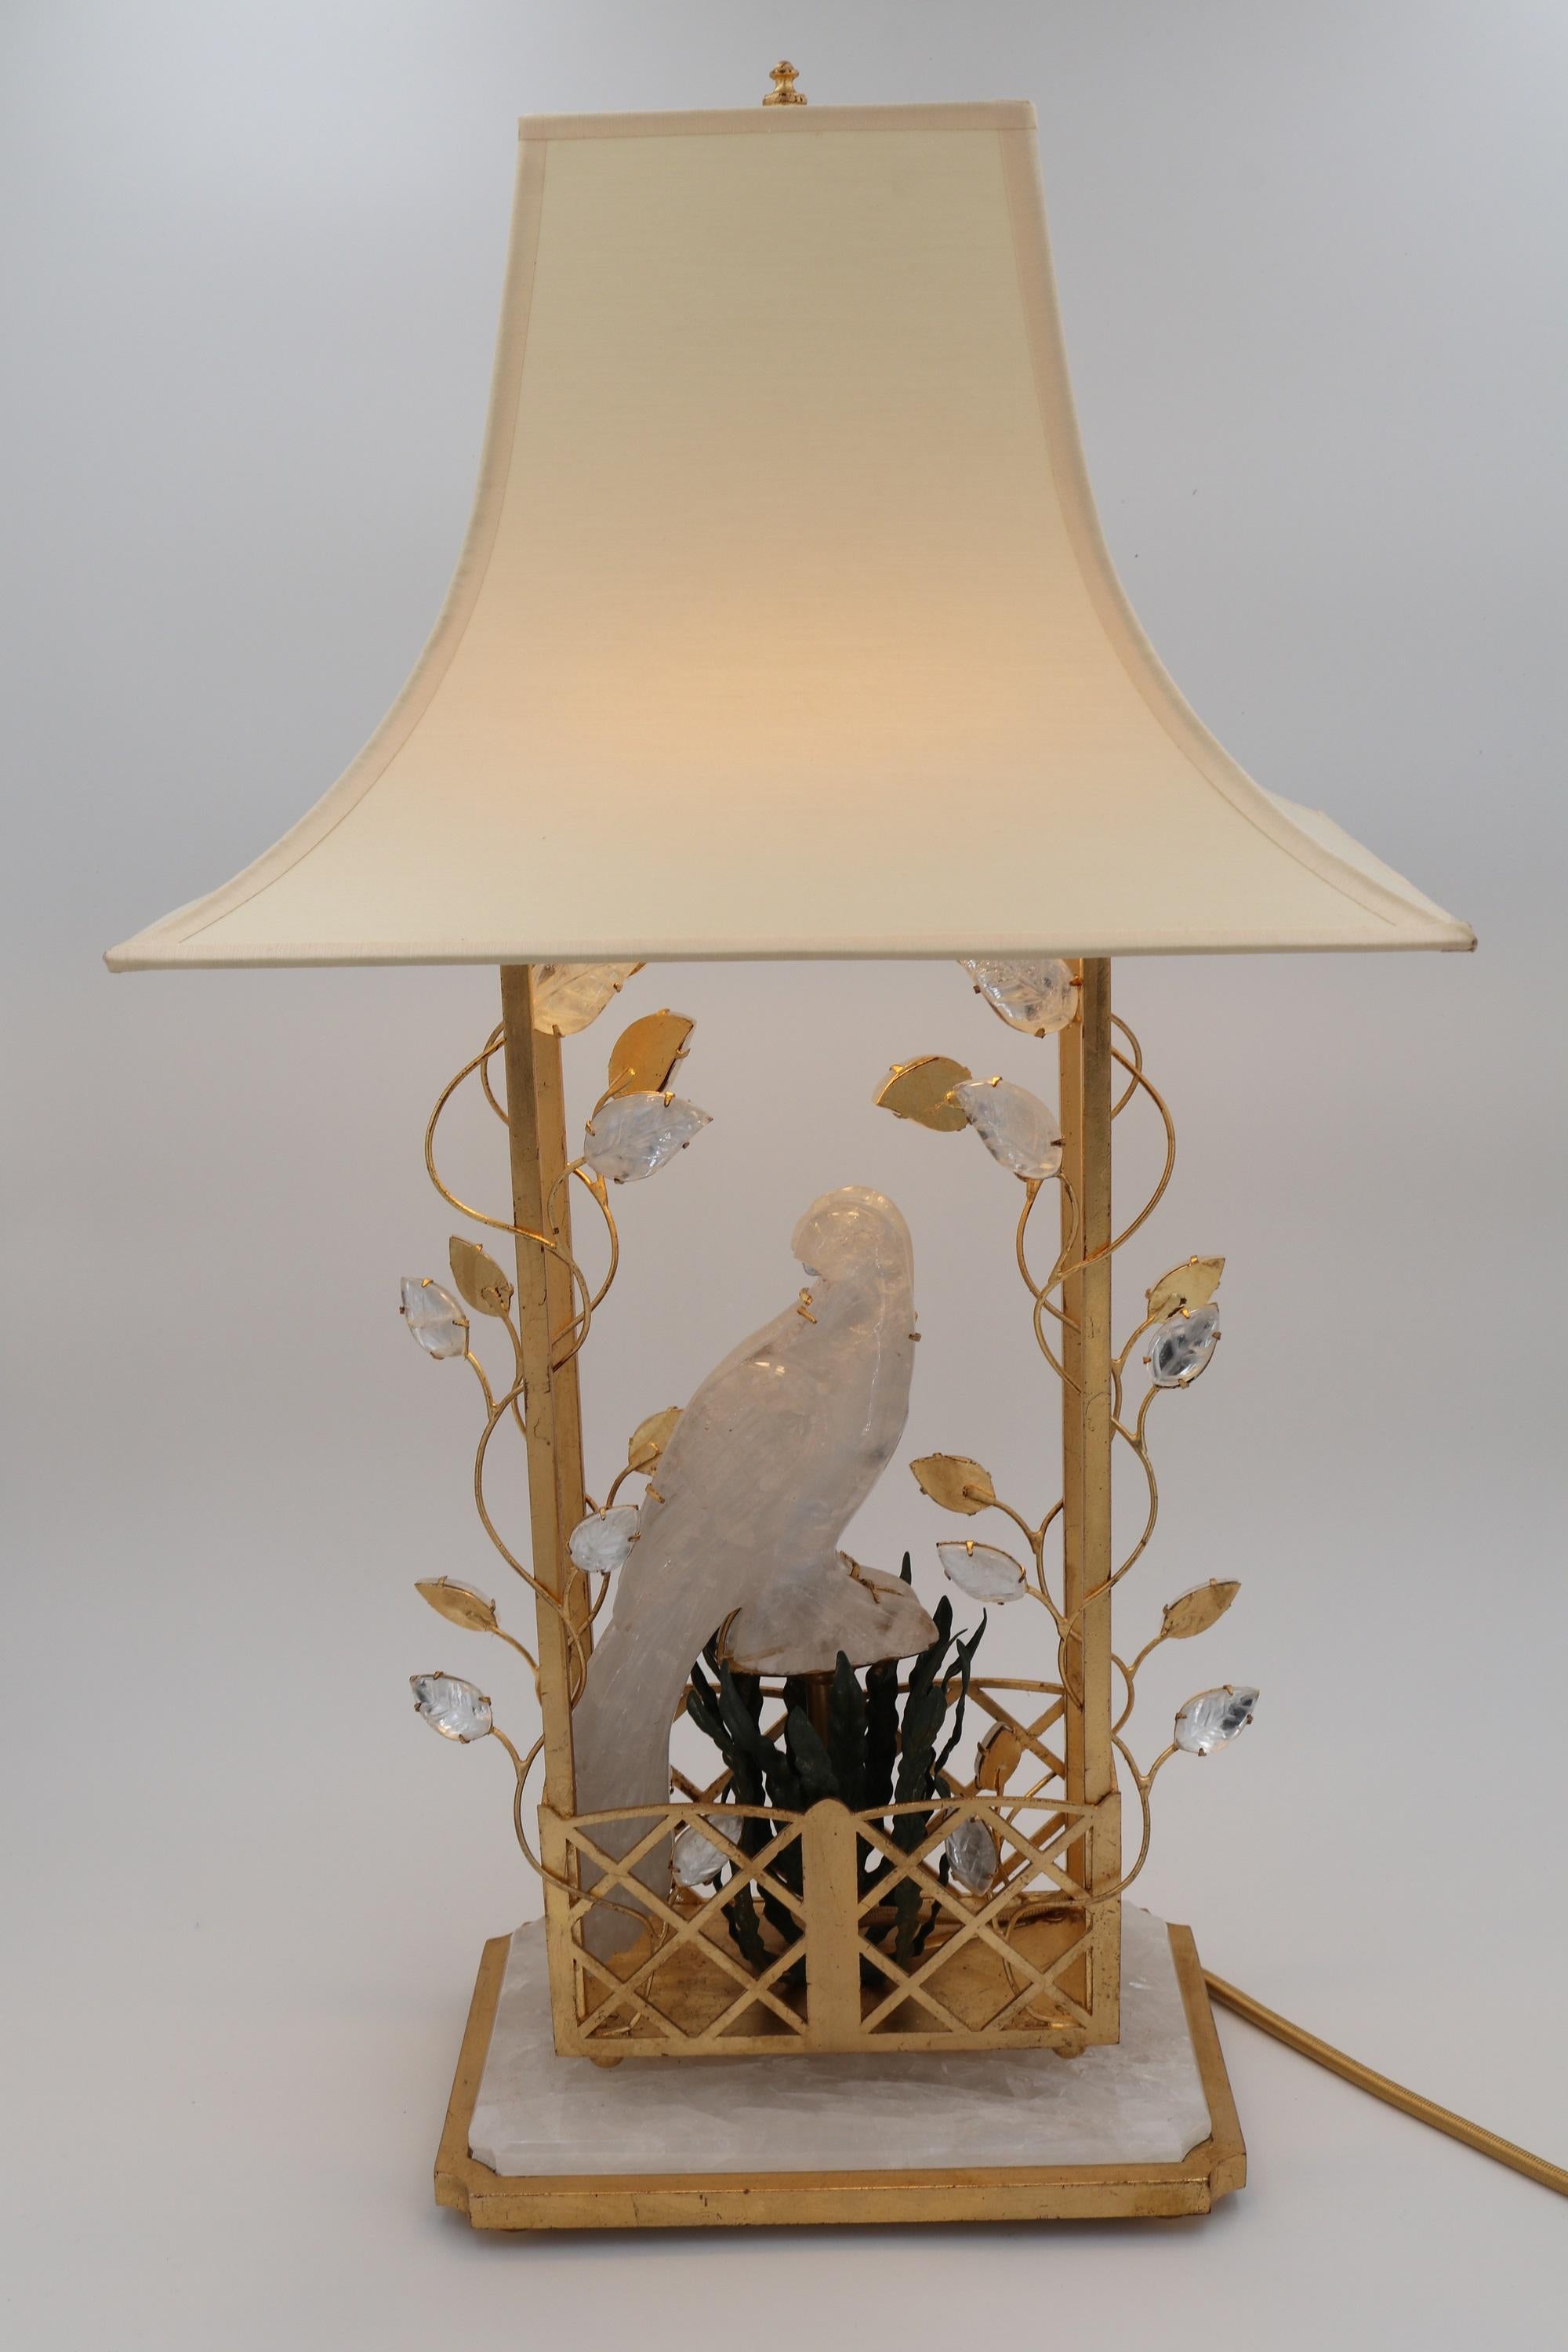 Maison Baguès lamp 1 light - Chinoiserie style with rock crystal bird
Iron and rock crystal

Various finish possible: gold leaf or silver leaf. 


UL listing possible on request for an additional charge

Please note that we are the official